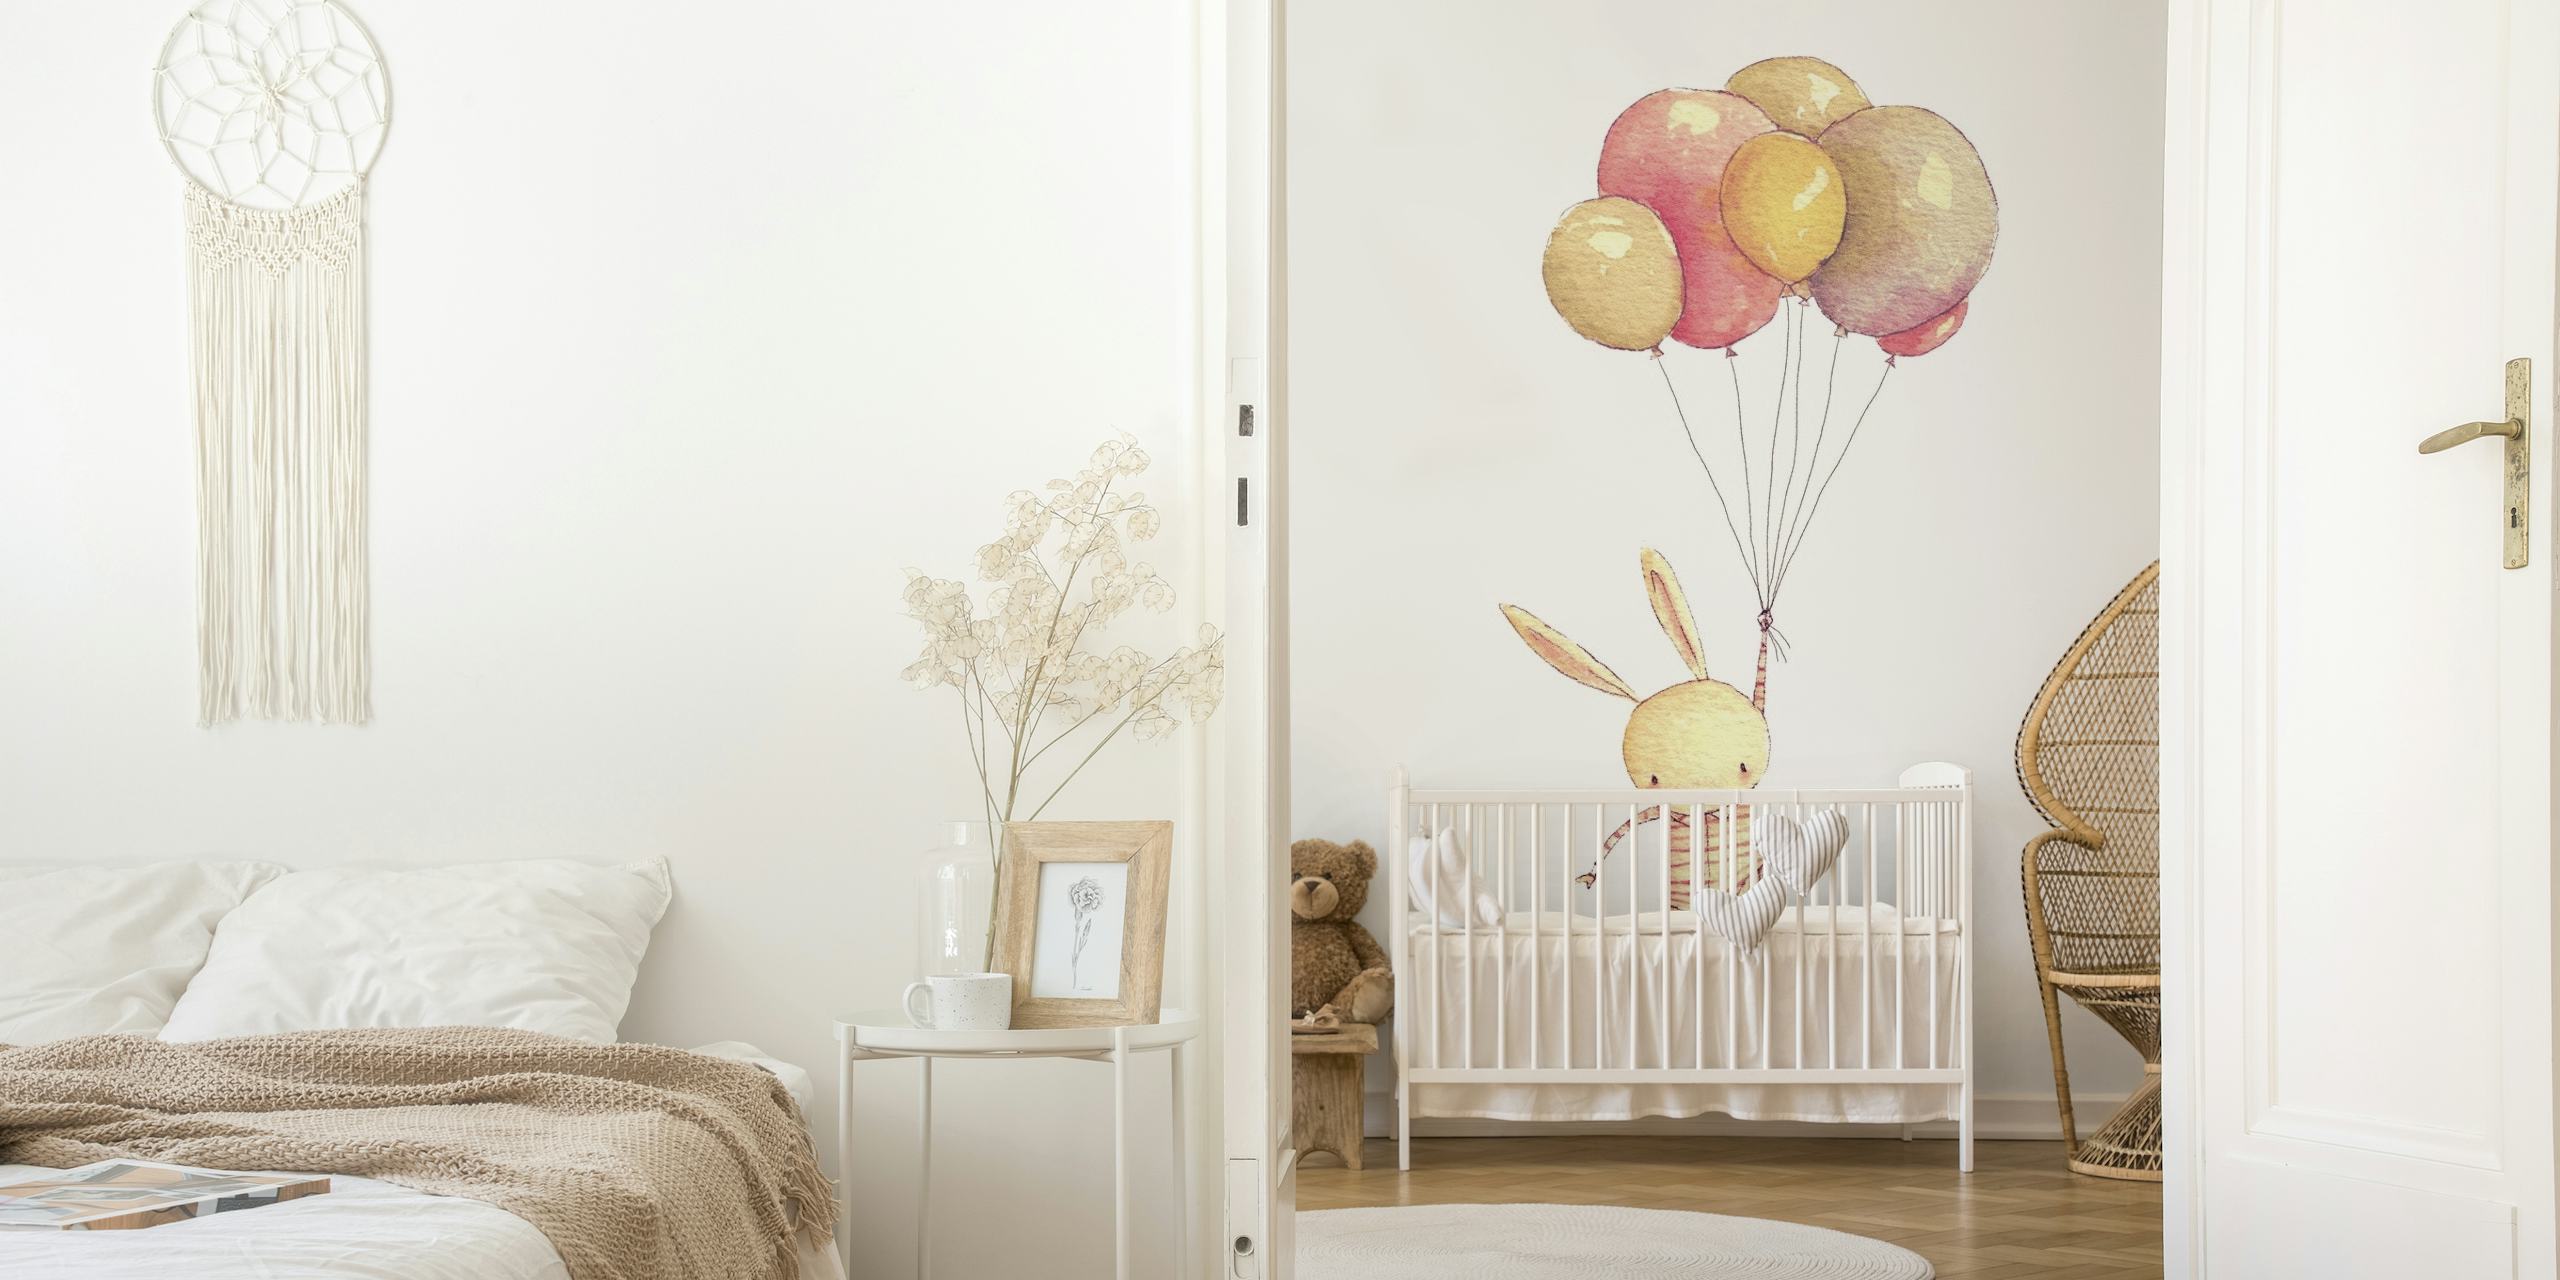 Illustration of a bunny tied to pastel balloons floating upwards in a wall mural.